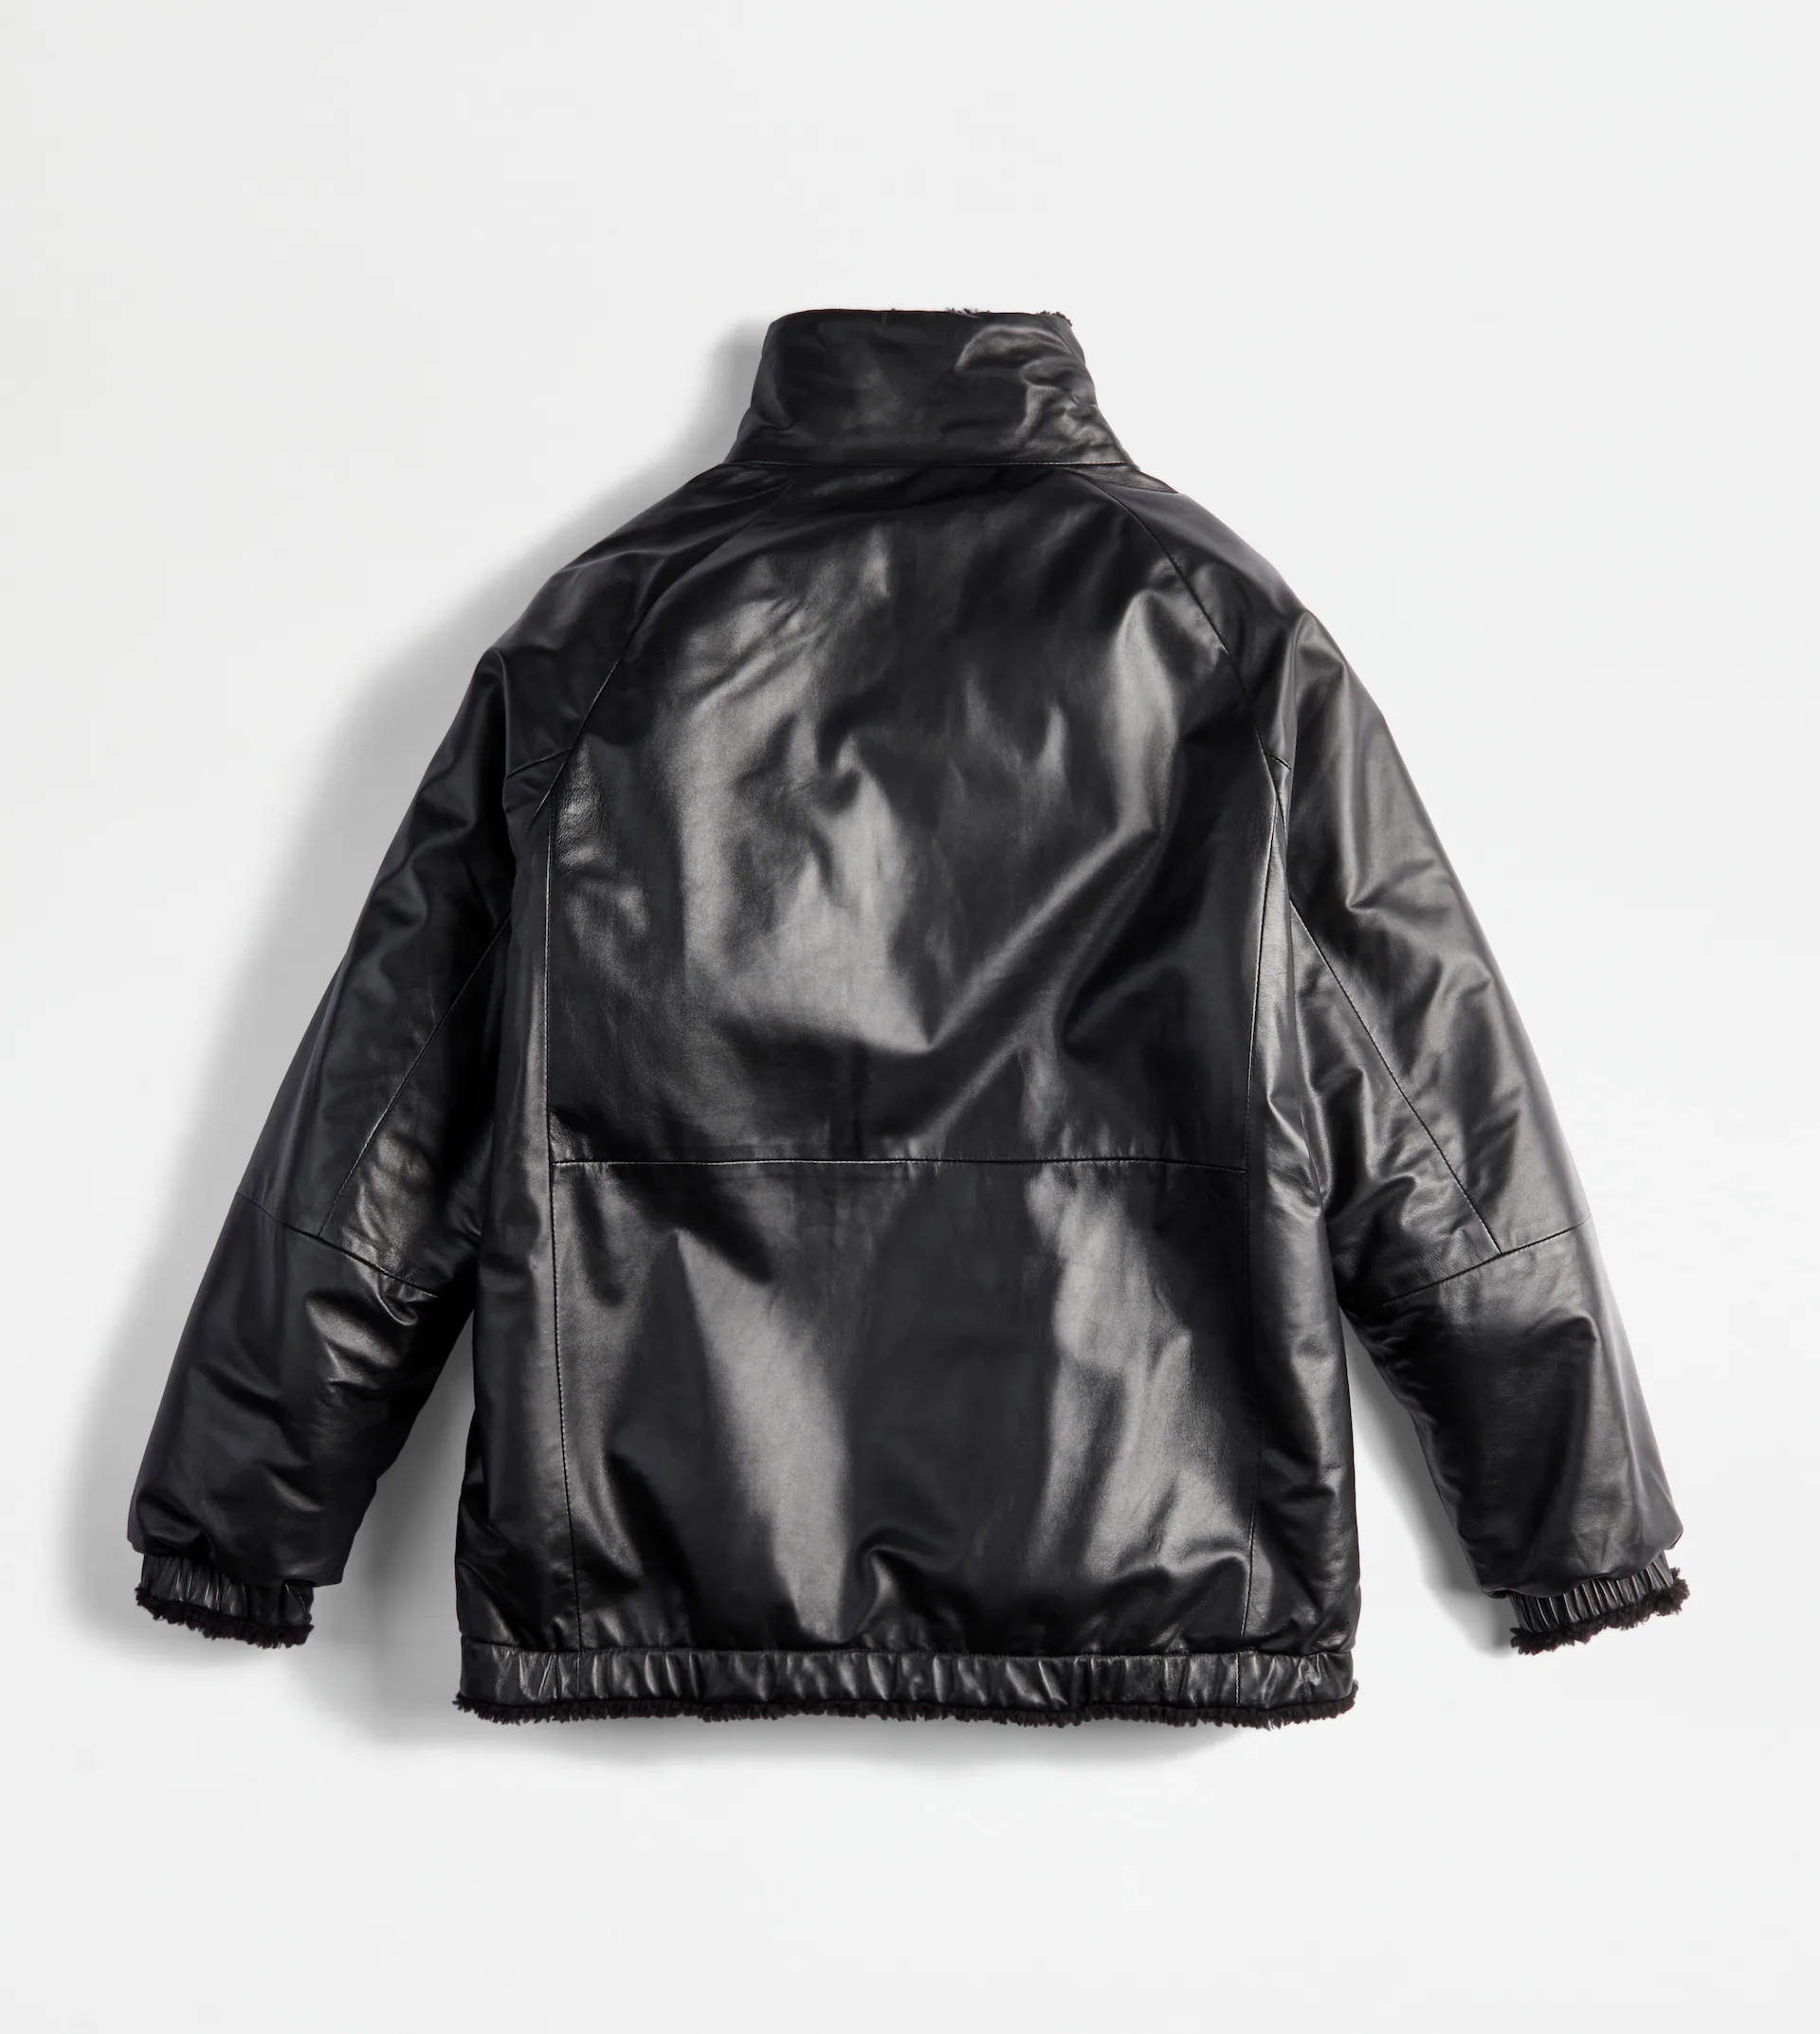 TOD'S BOMBER JACKET IN LEATHER - BLACK - 8